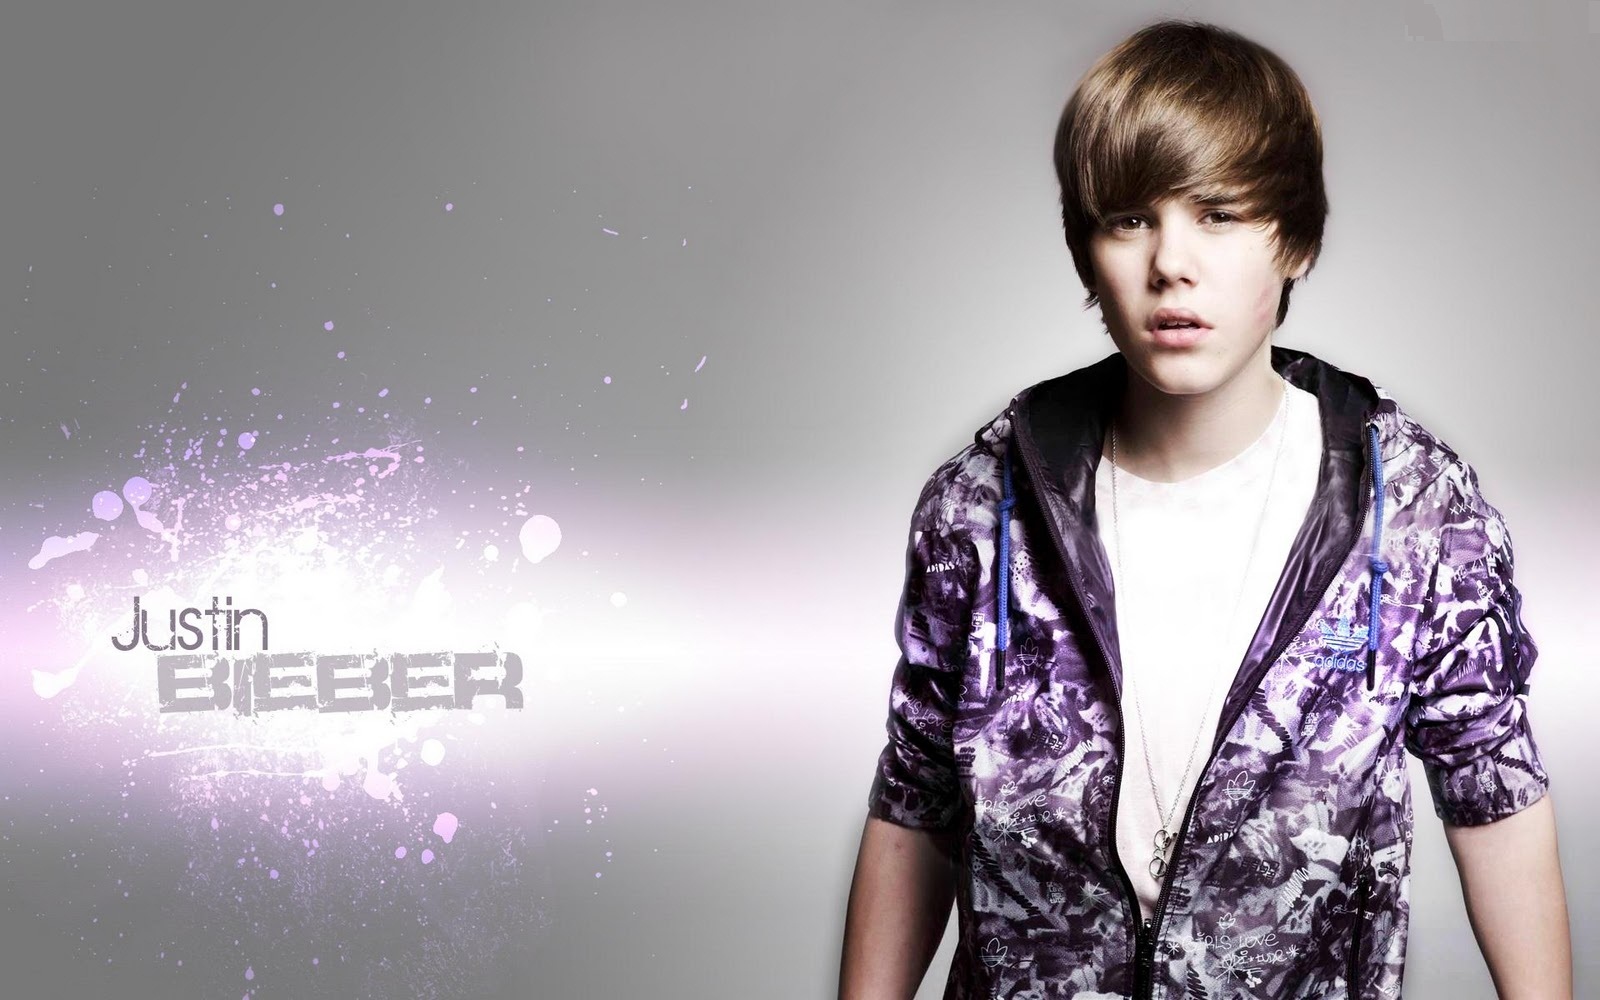 Justin Bieber New HD wallpapers 2012 2013 All About HD Wallpapers